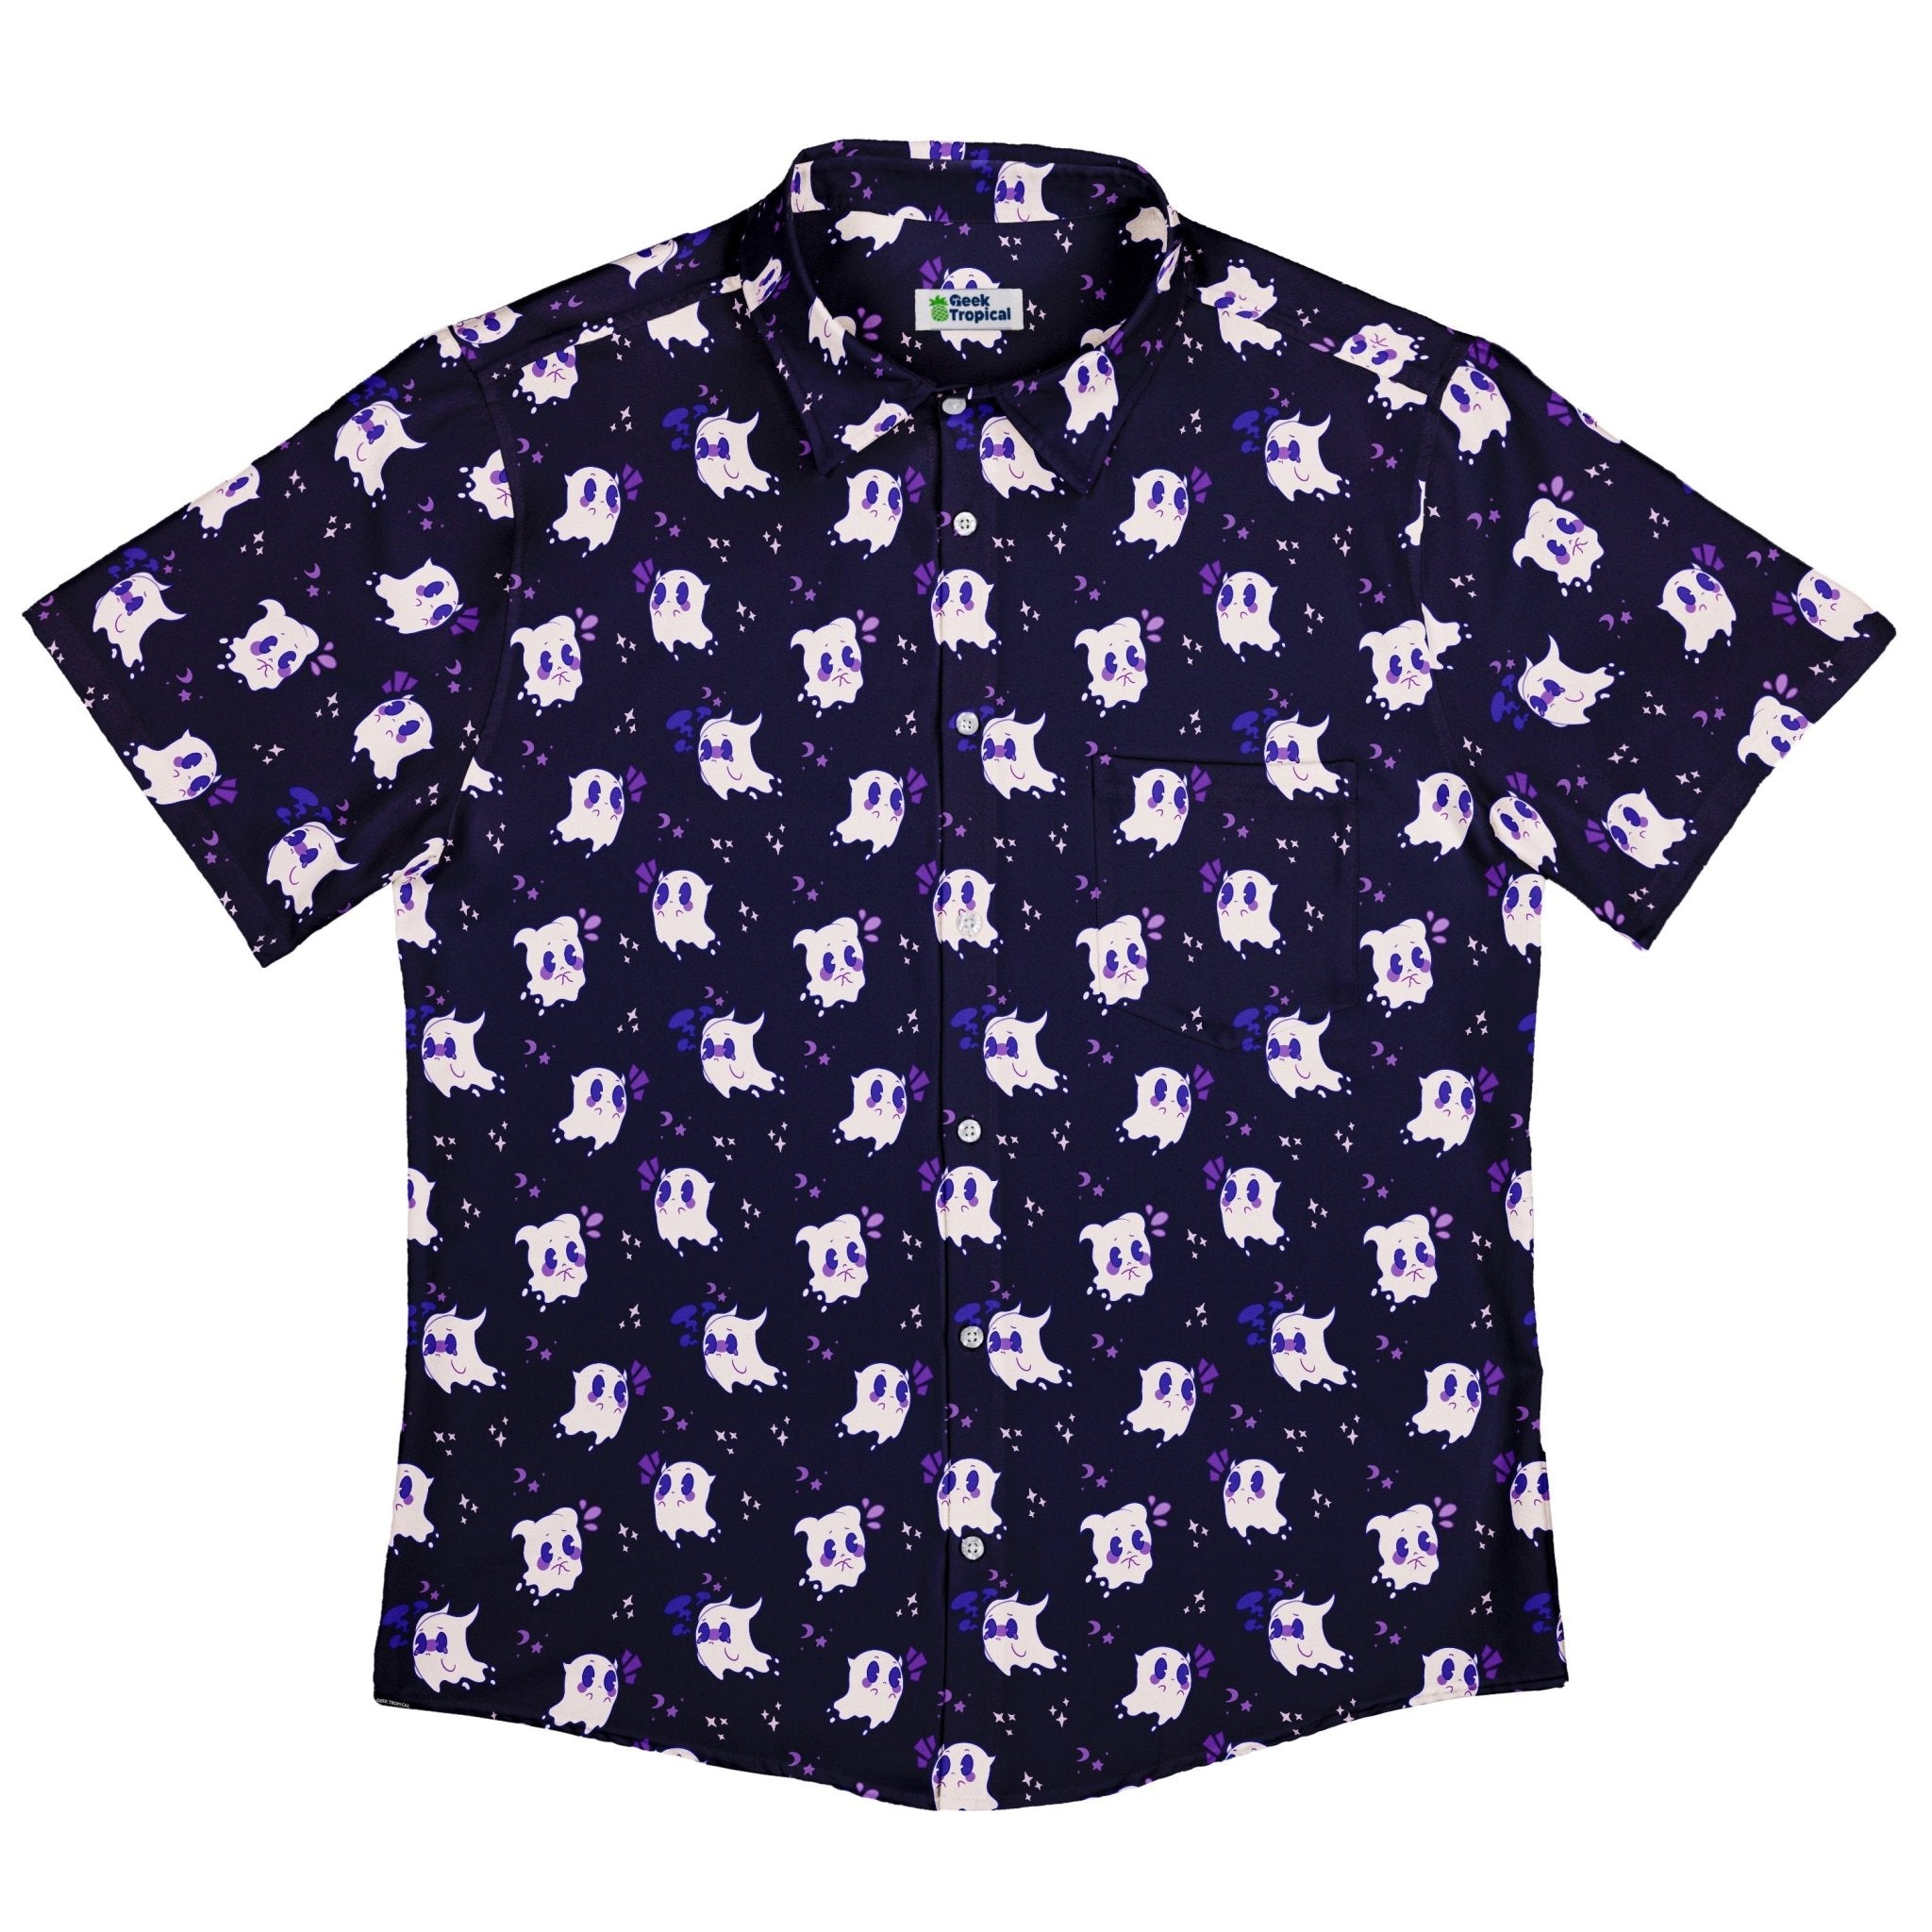 Anxious Ghost Purple Button Up Shirt - adult sizing - Anime - Design by Ardi Tong